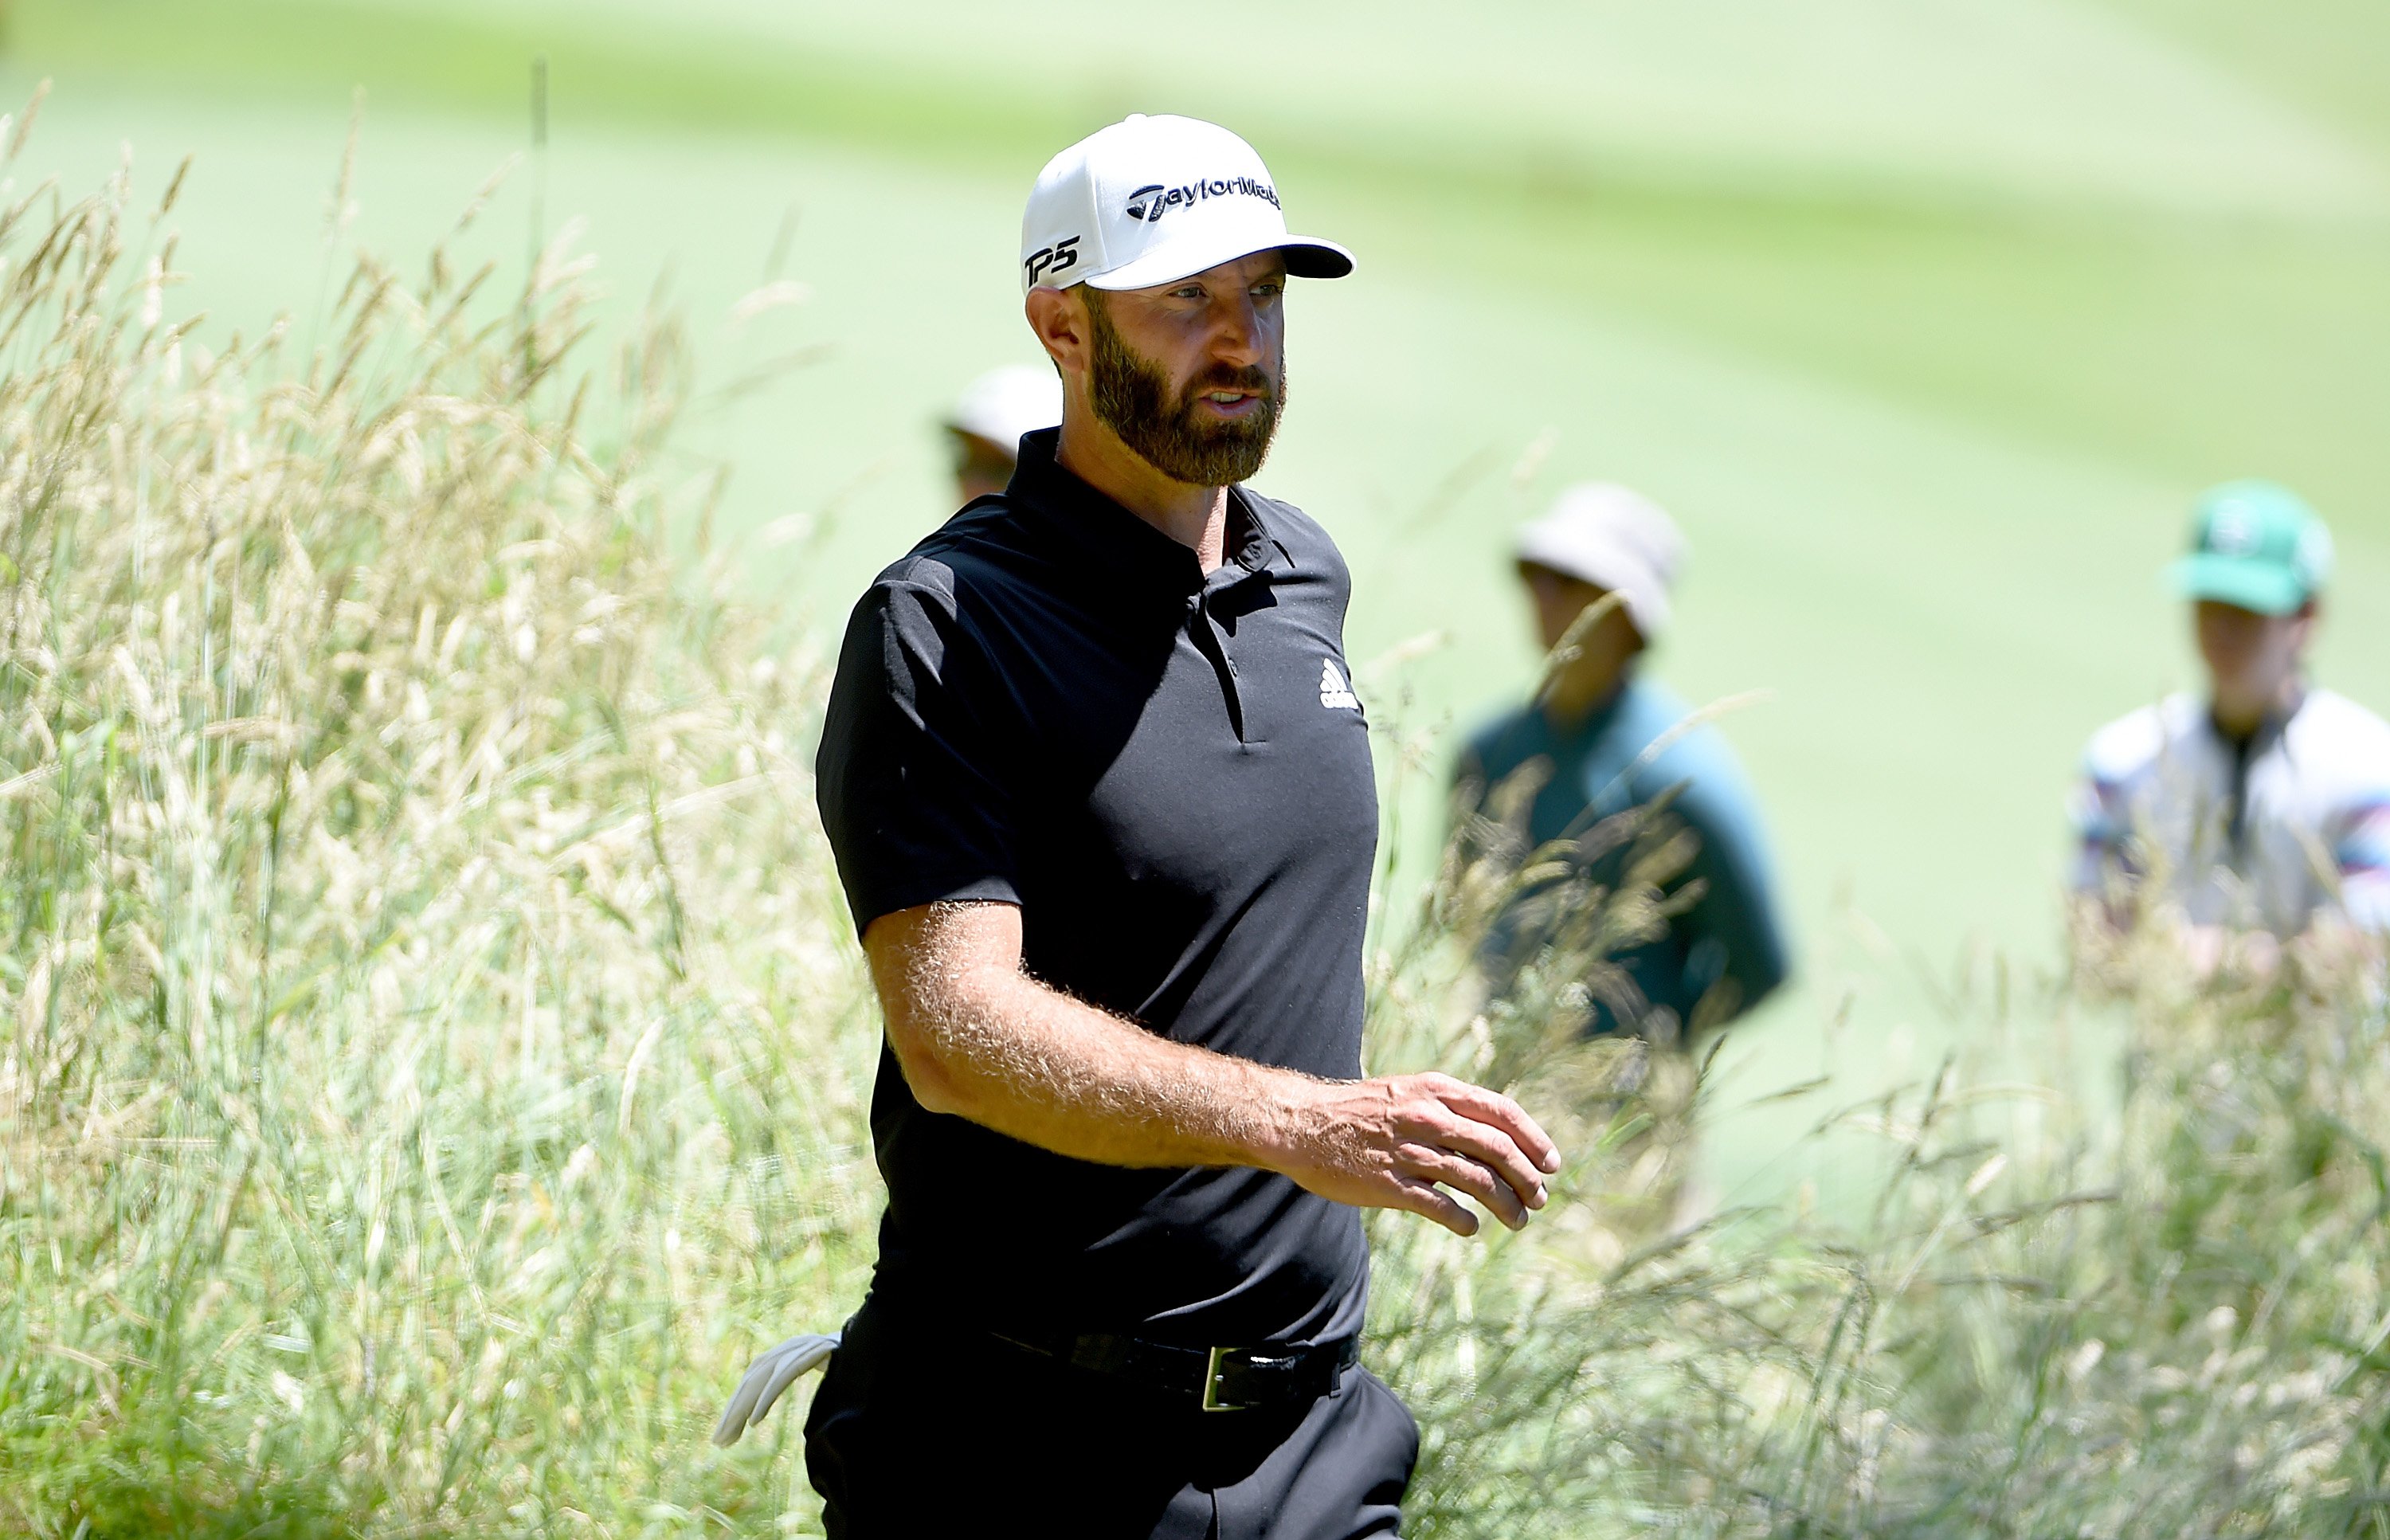 Dustin Johnson walks off the tee box on the fifth hole during round two of the LIV Golf Invitational - Portland at Pumpkin Ridge Golf Club on July 01, 2022 in North Plains, Oregon.